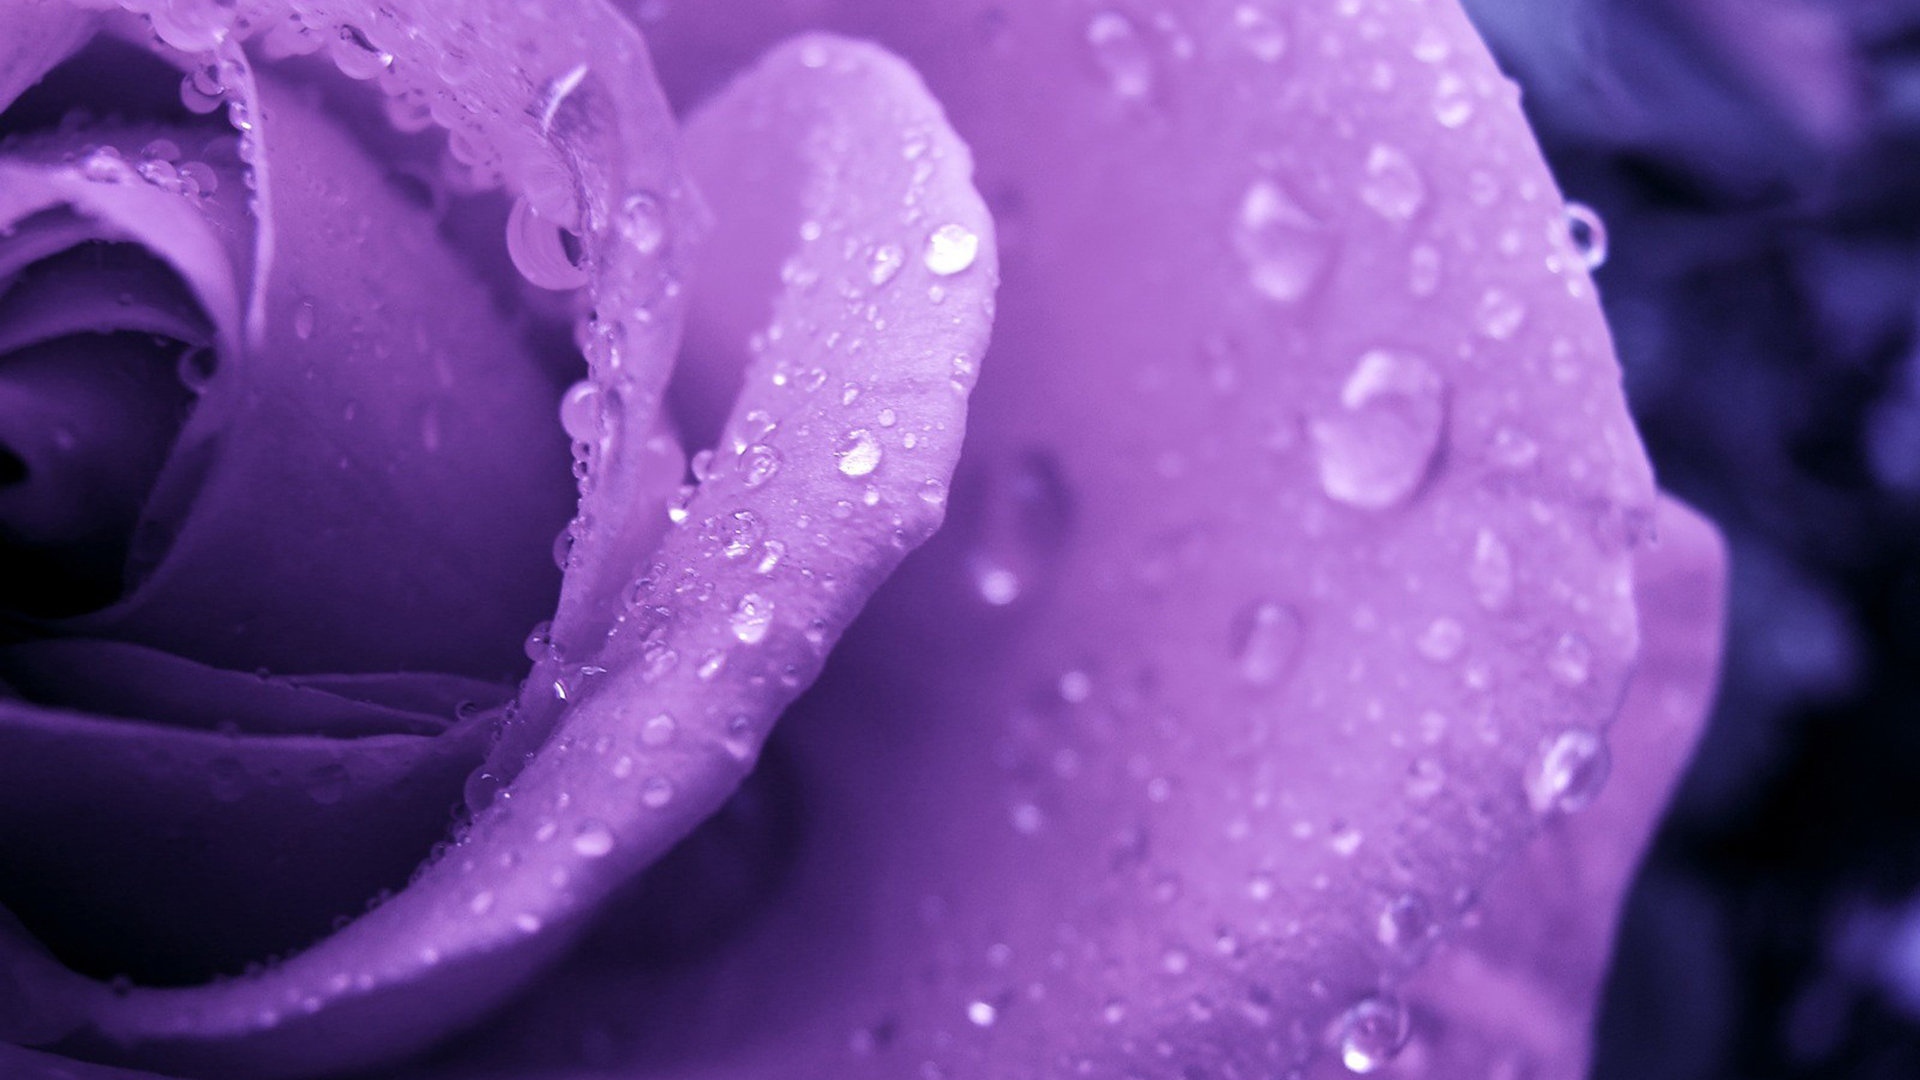 Purple Rose And Water Droplets Wallpaper Image